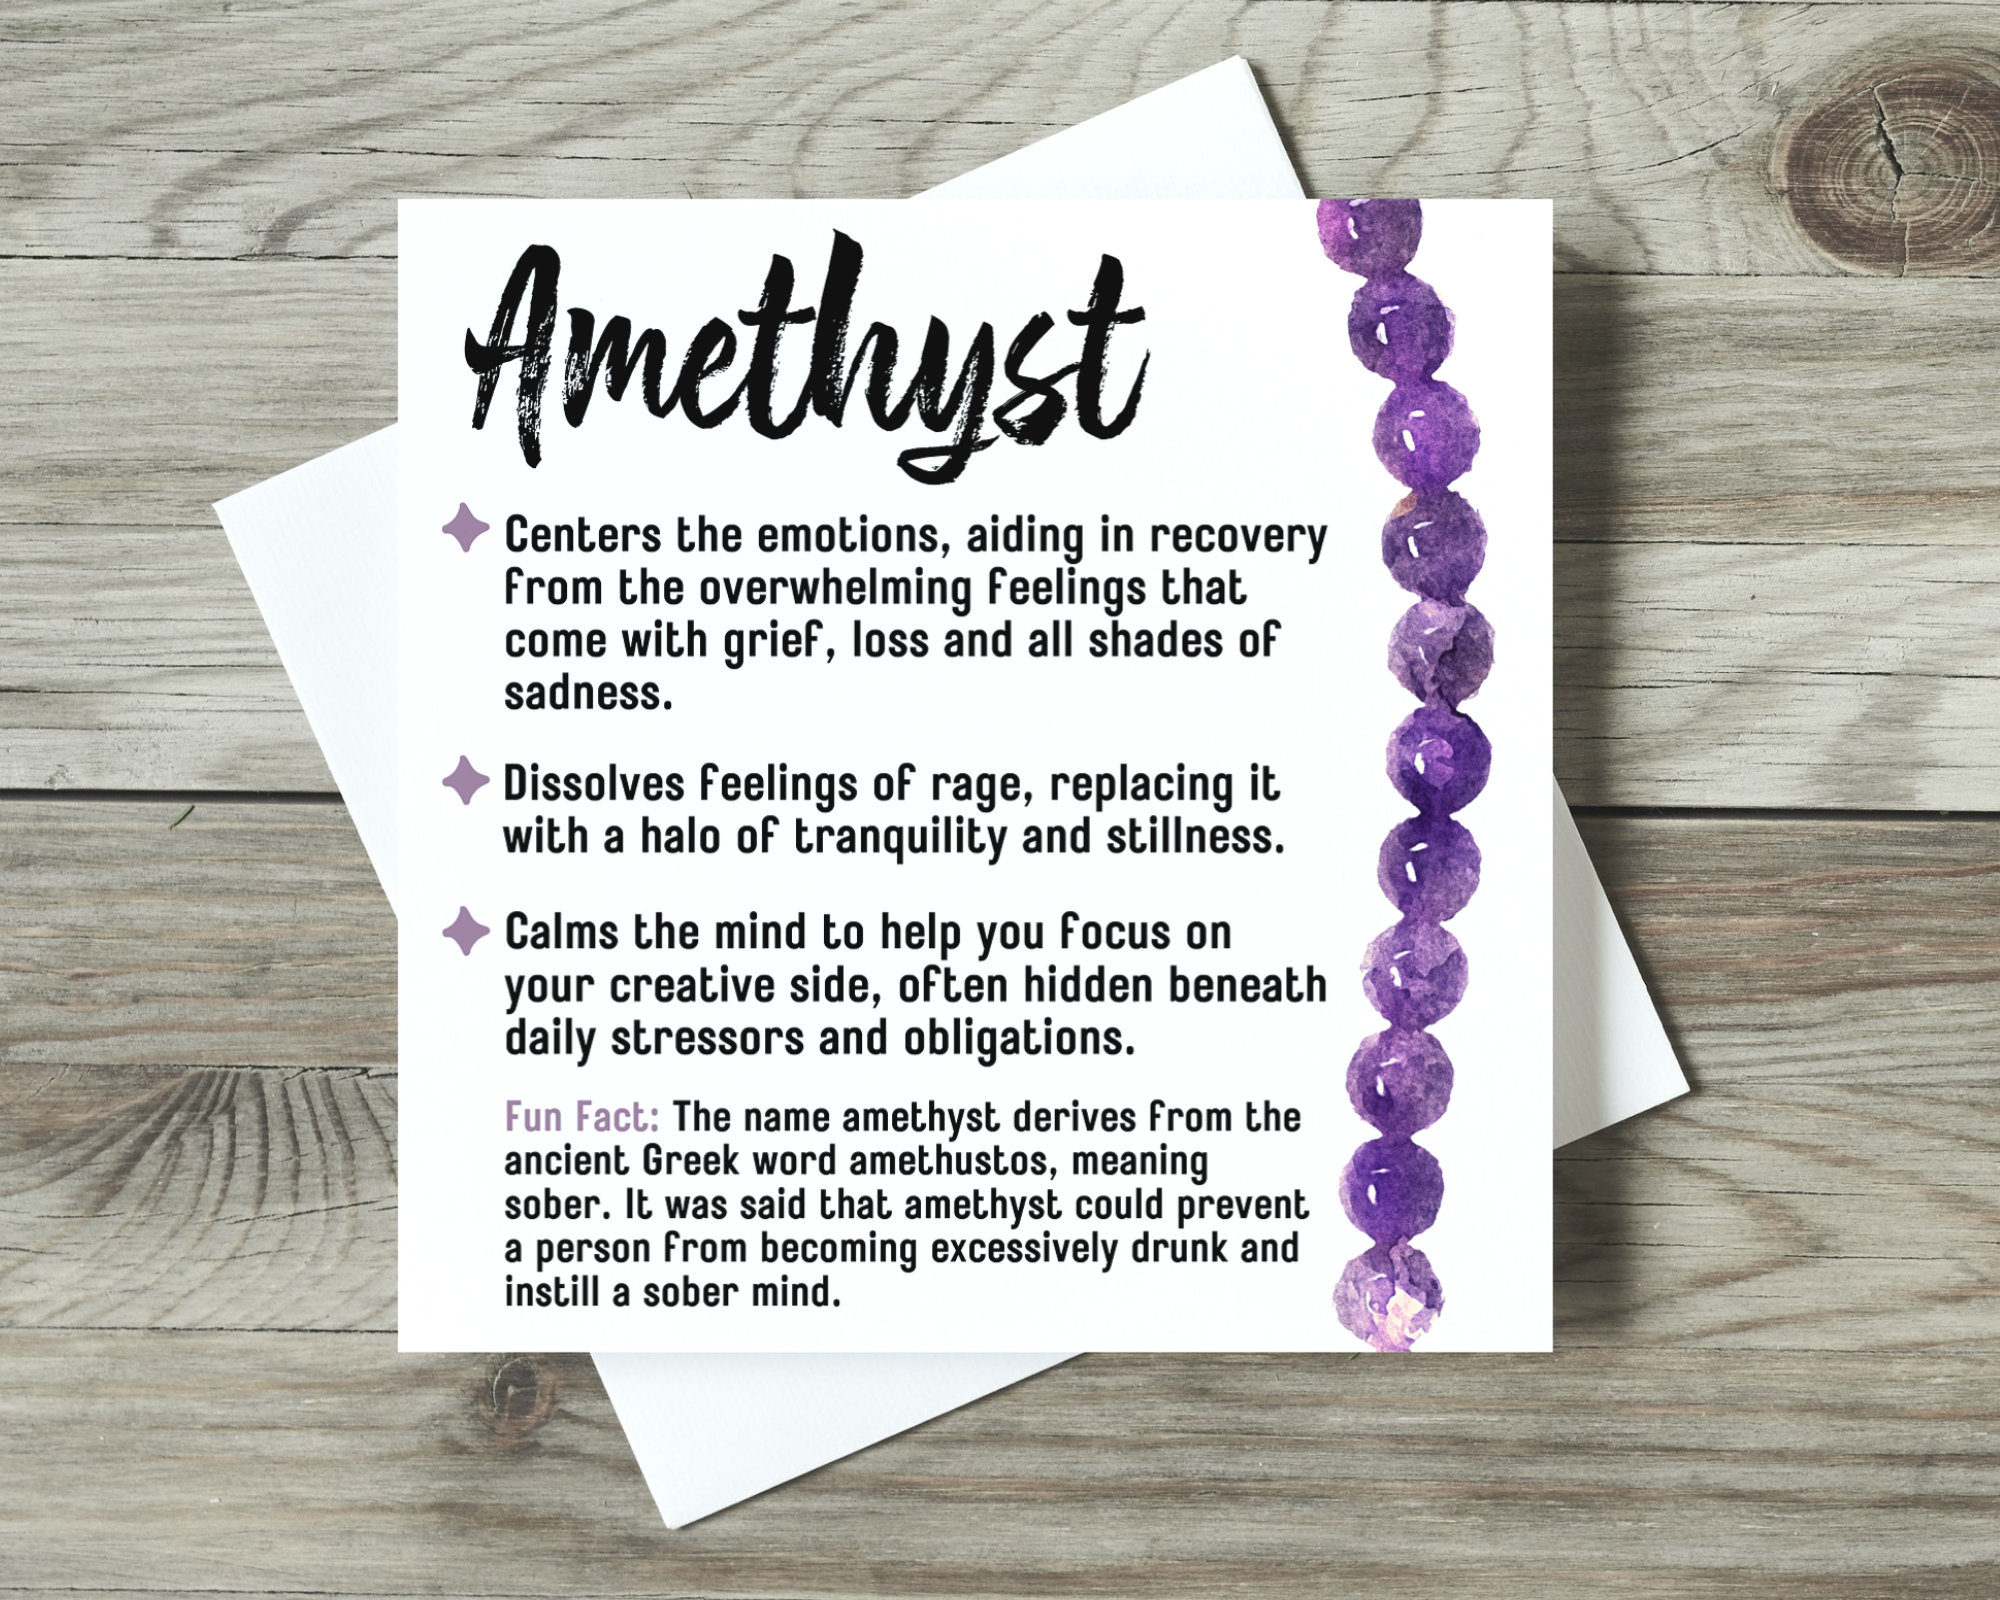 What is the Meaning of Amethyst